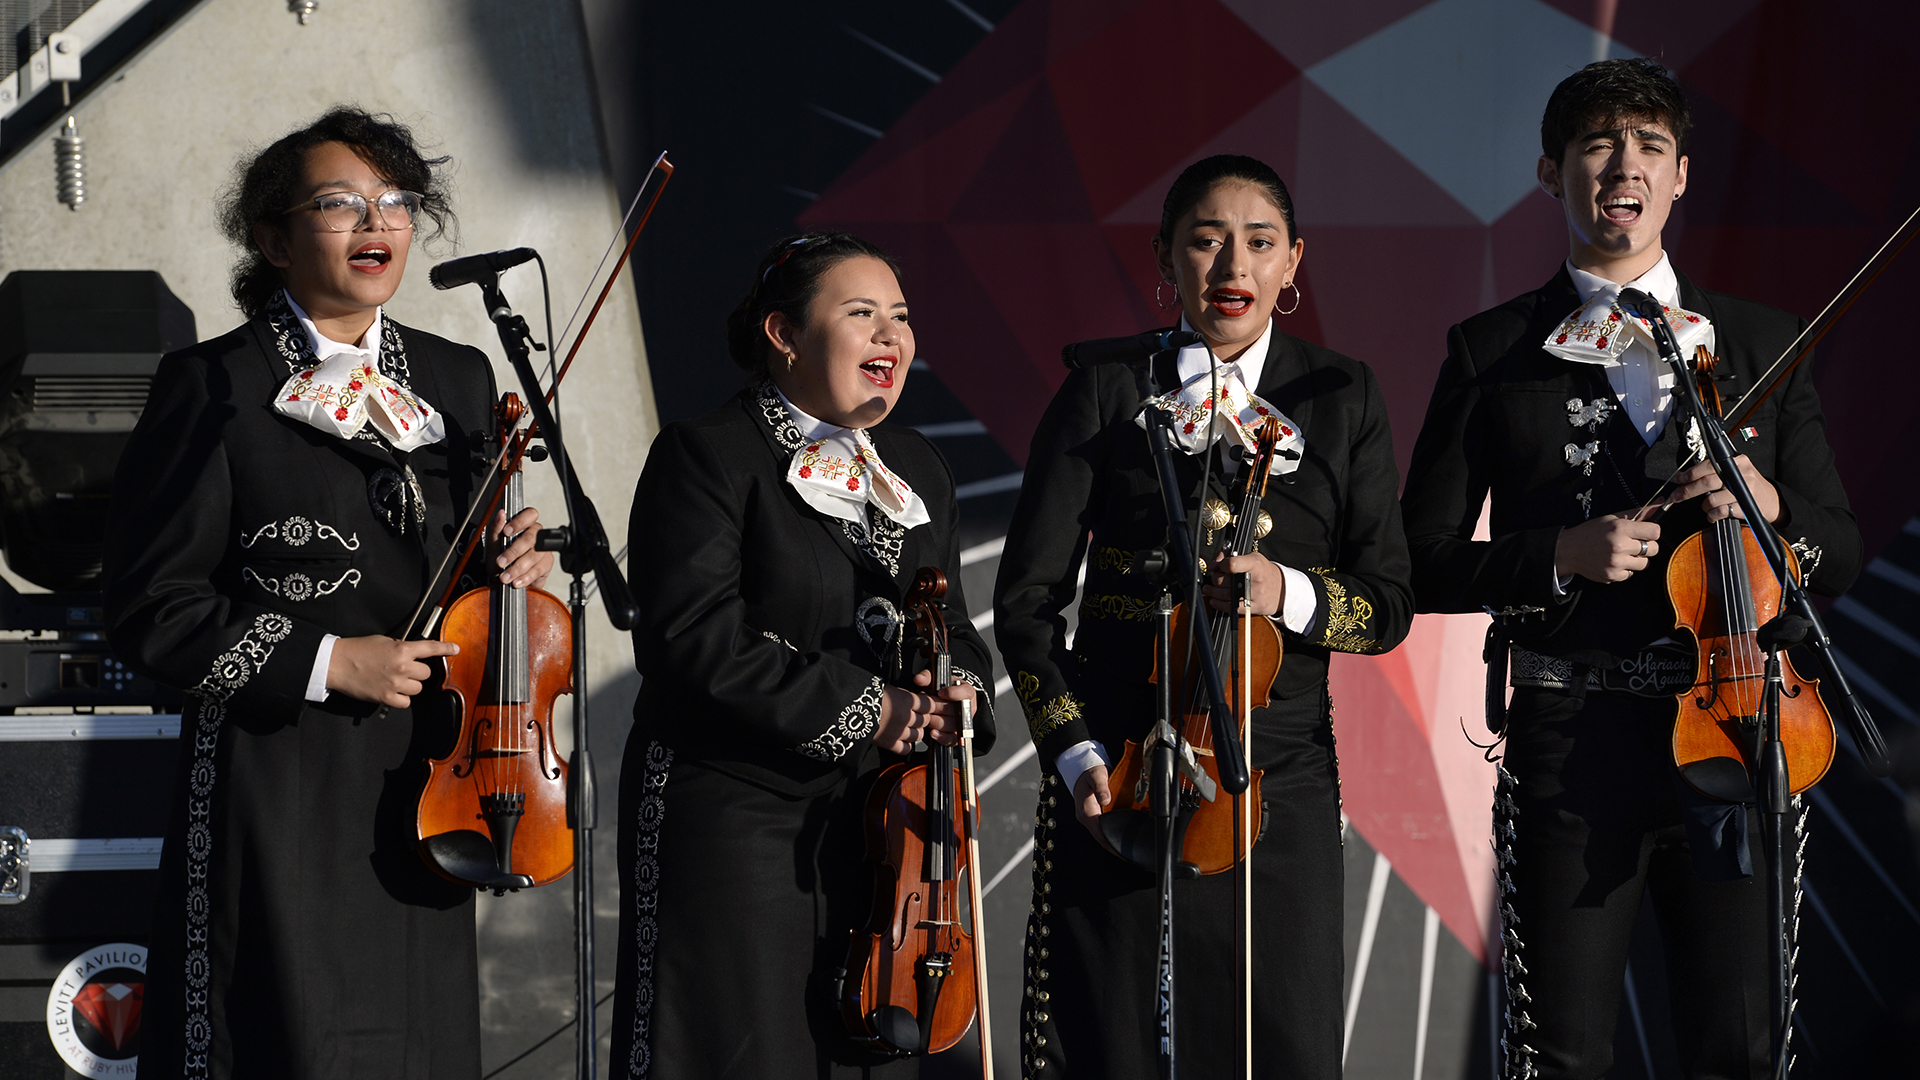 Mariachi meets orchestra for a sold-out performance at Boettcher Concert Hall